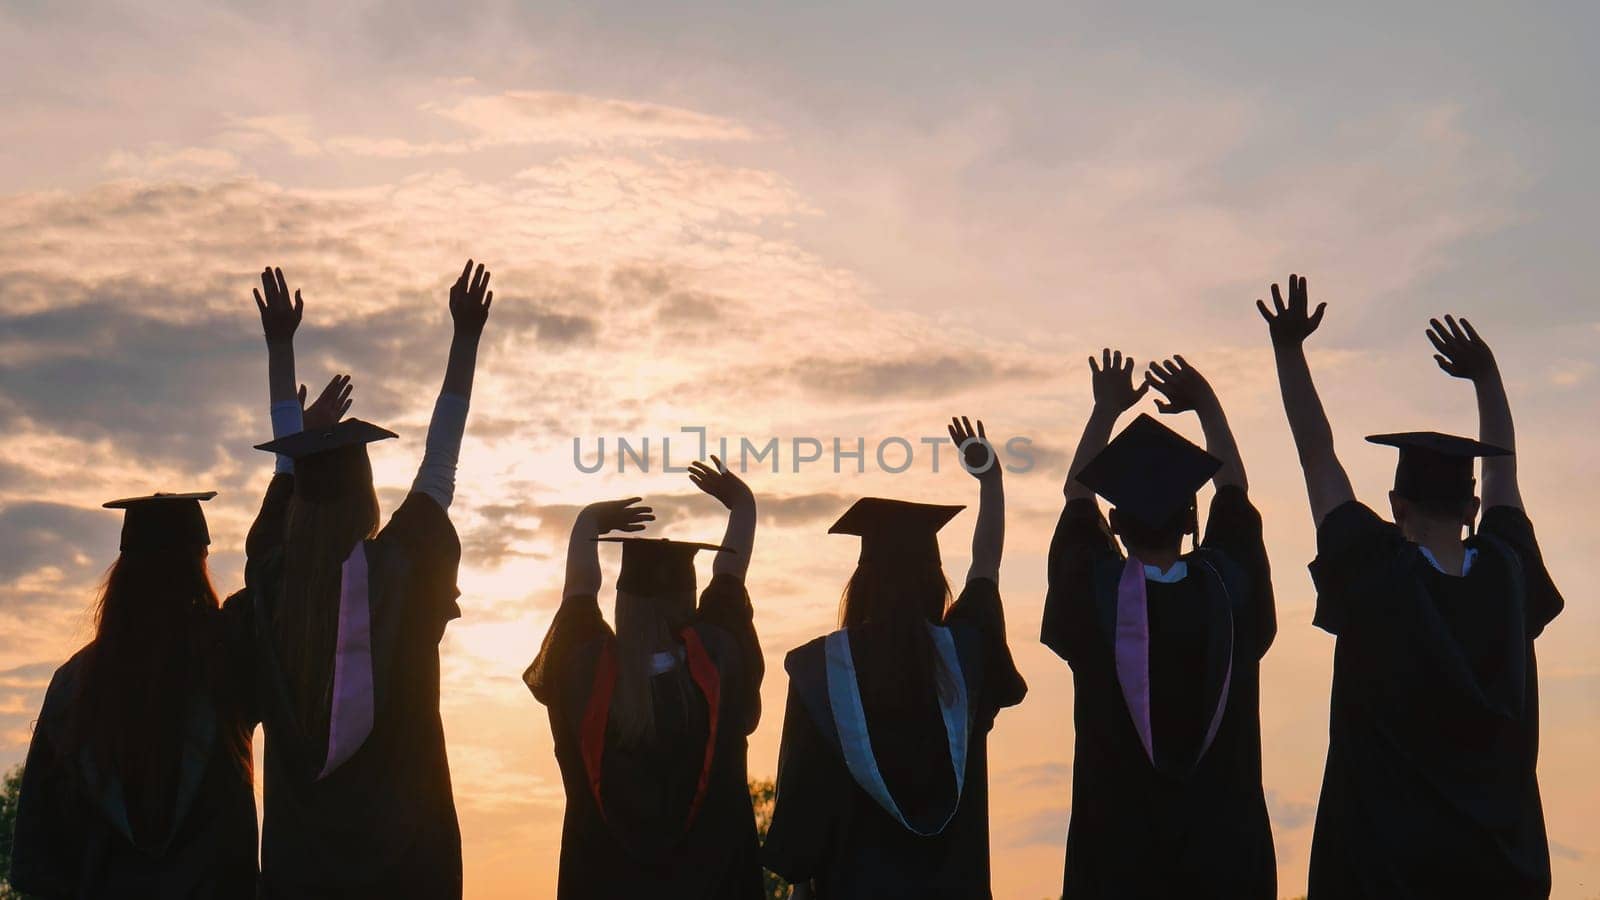 Silhouettes of graduates in black robes waving their arms against the evening sunset